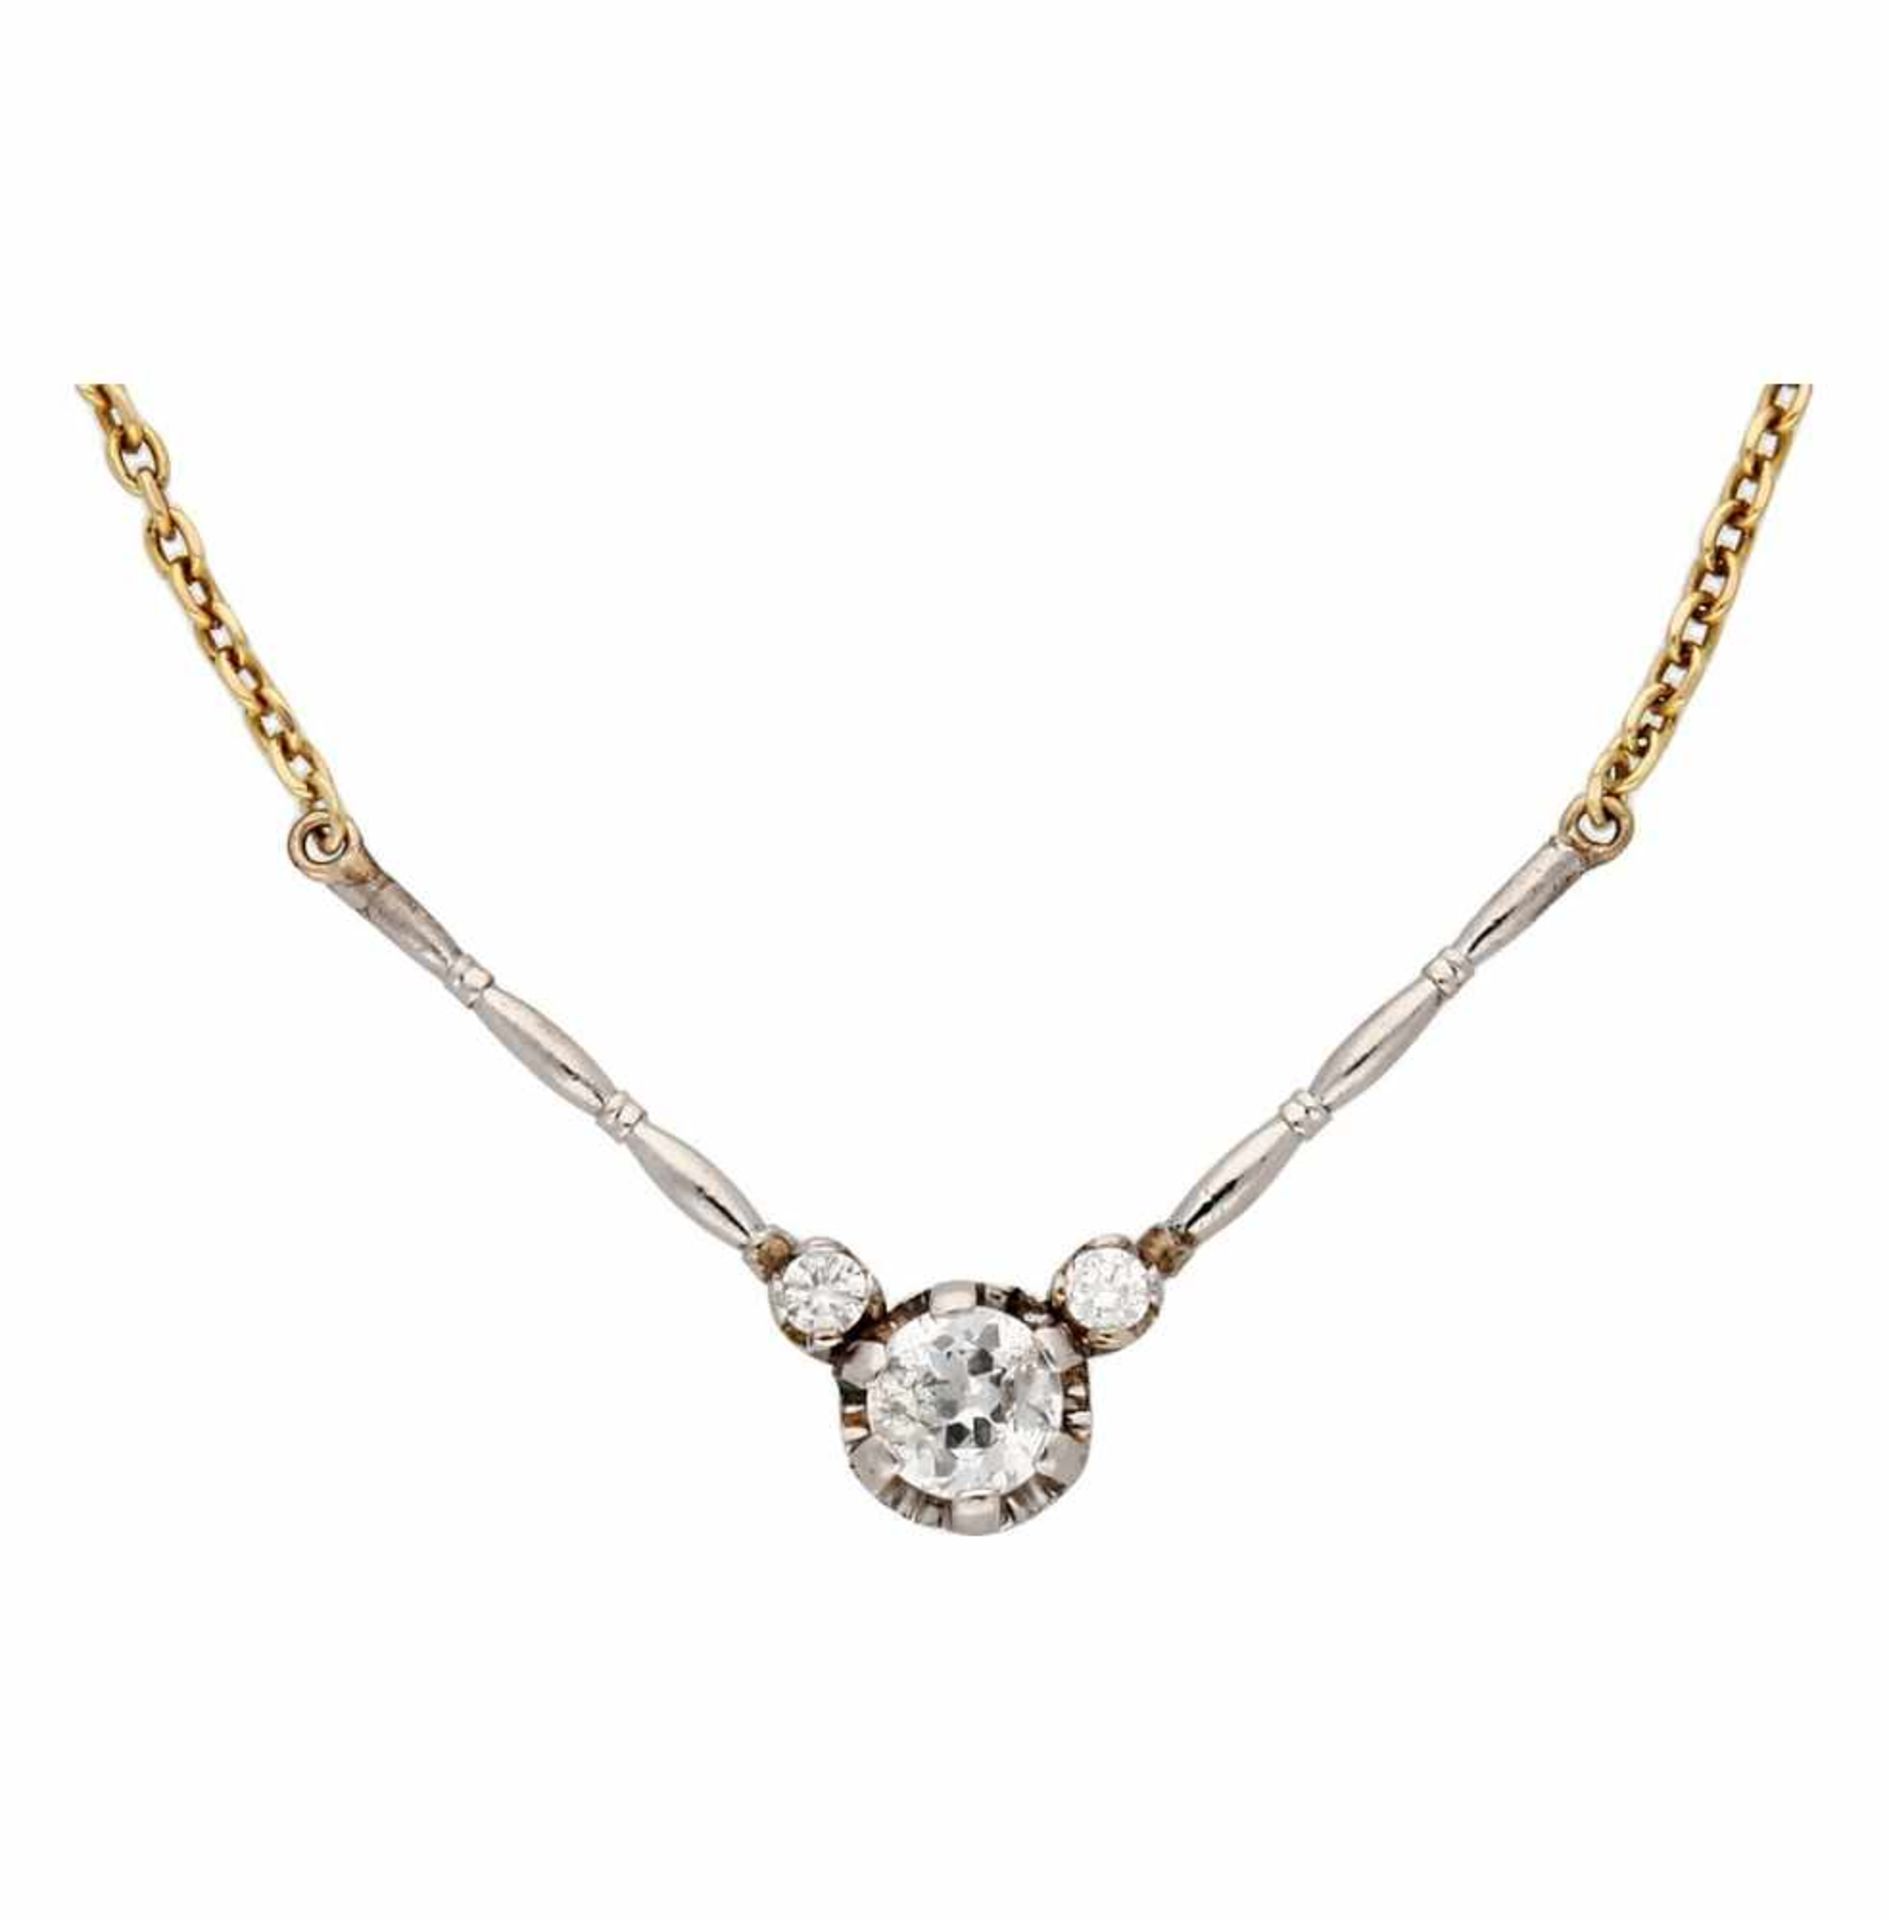 Choker with solitaire diamond, early 20th Century.Gold, platinum and old brilliant and brilliant cut